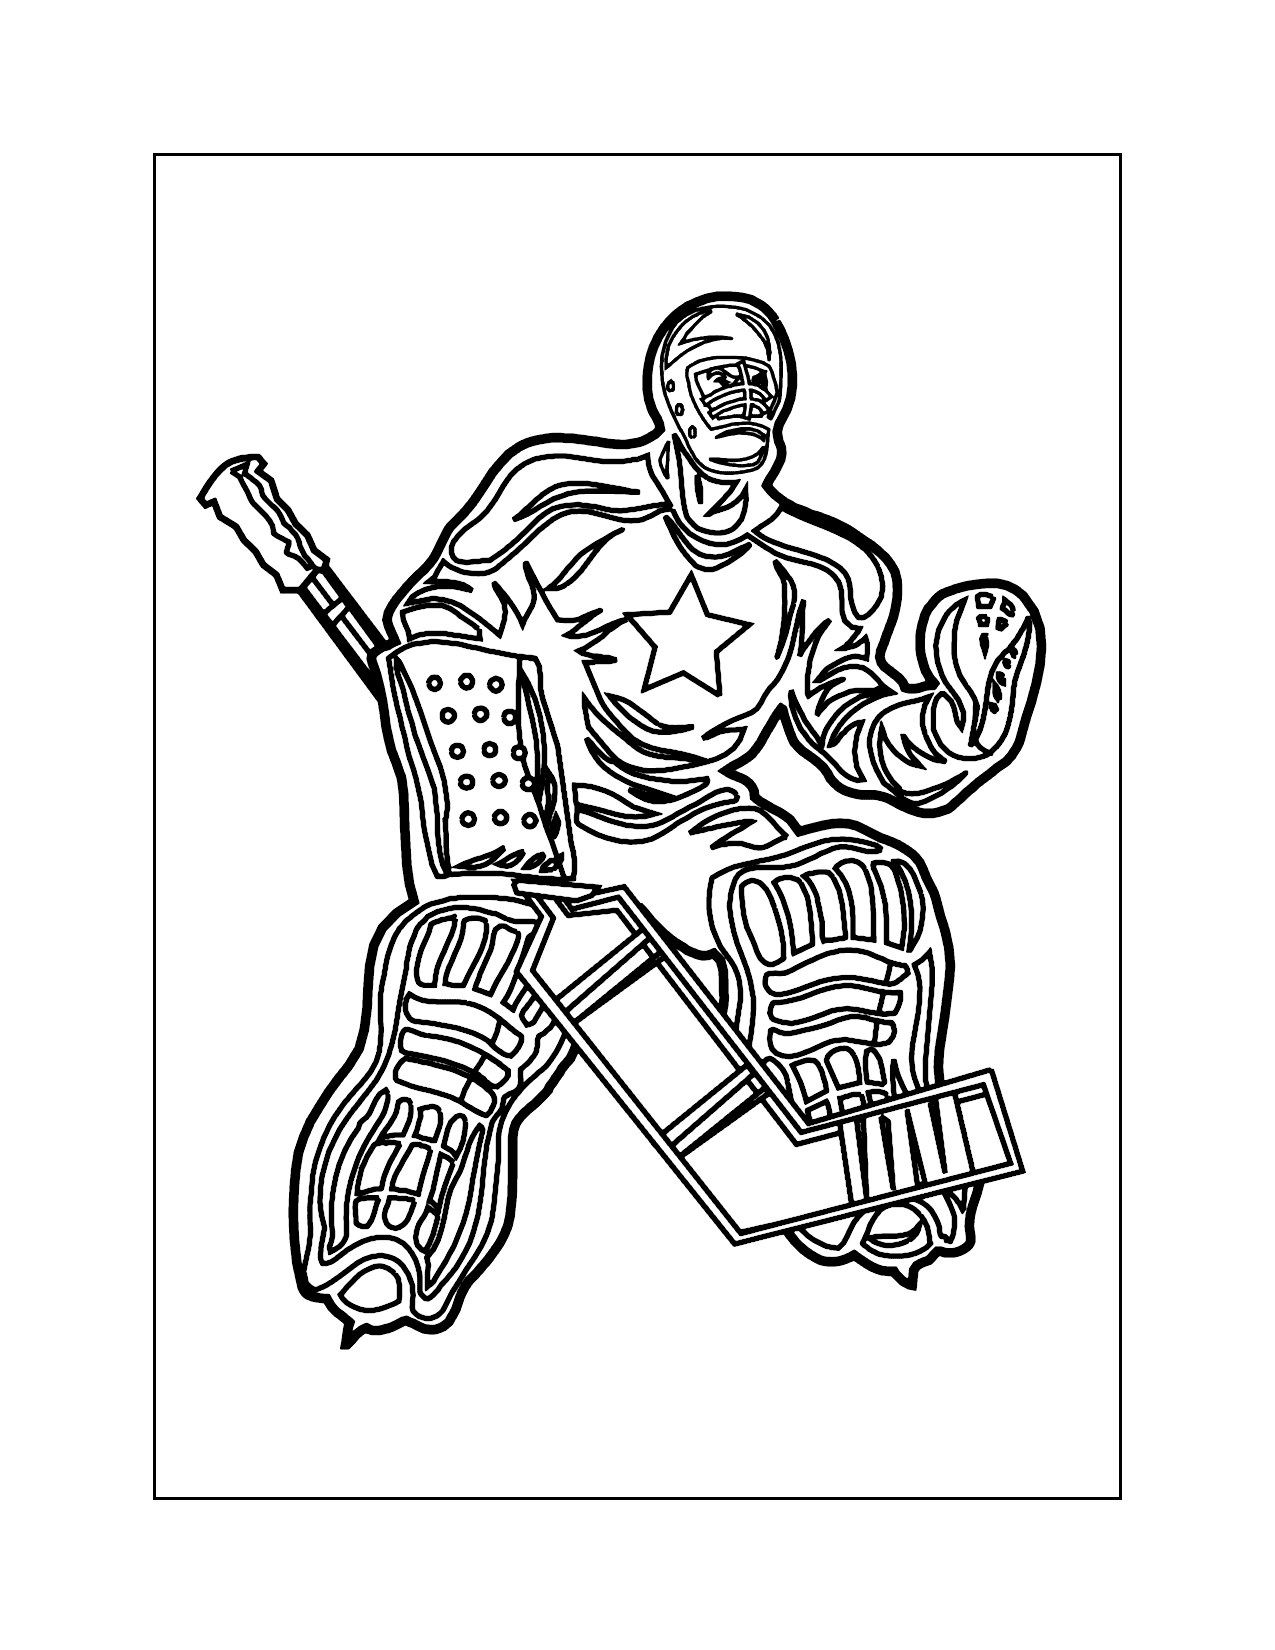 Hockey Goalie Coloring Page